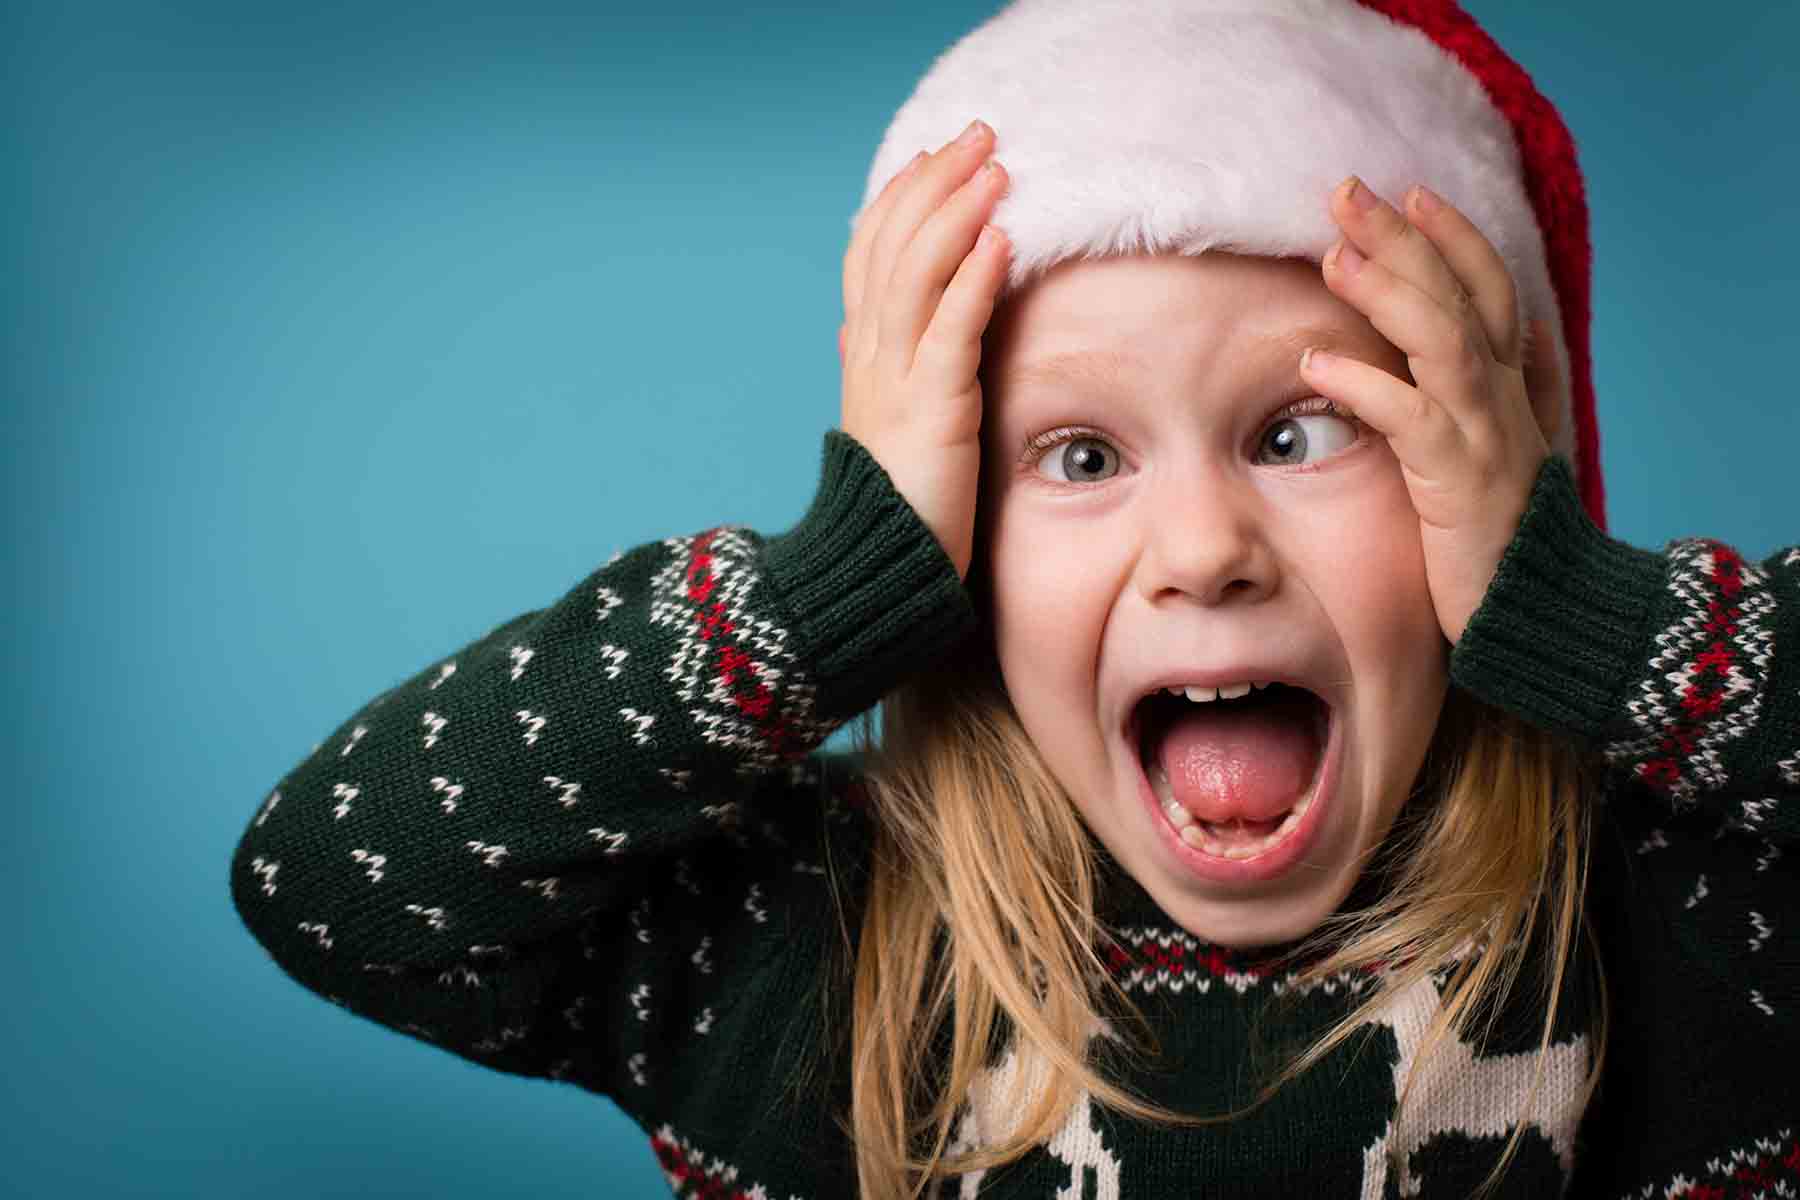 Very excited young girl in a holiday sweater